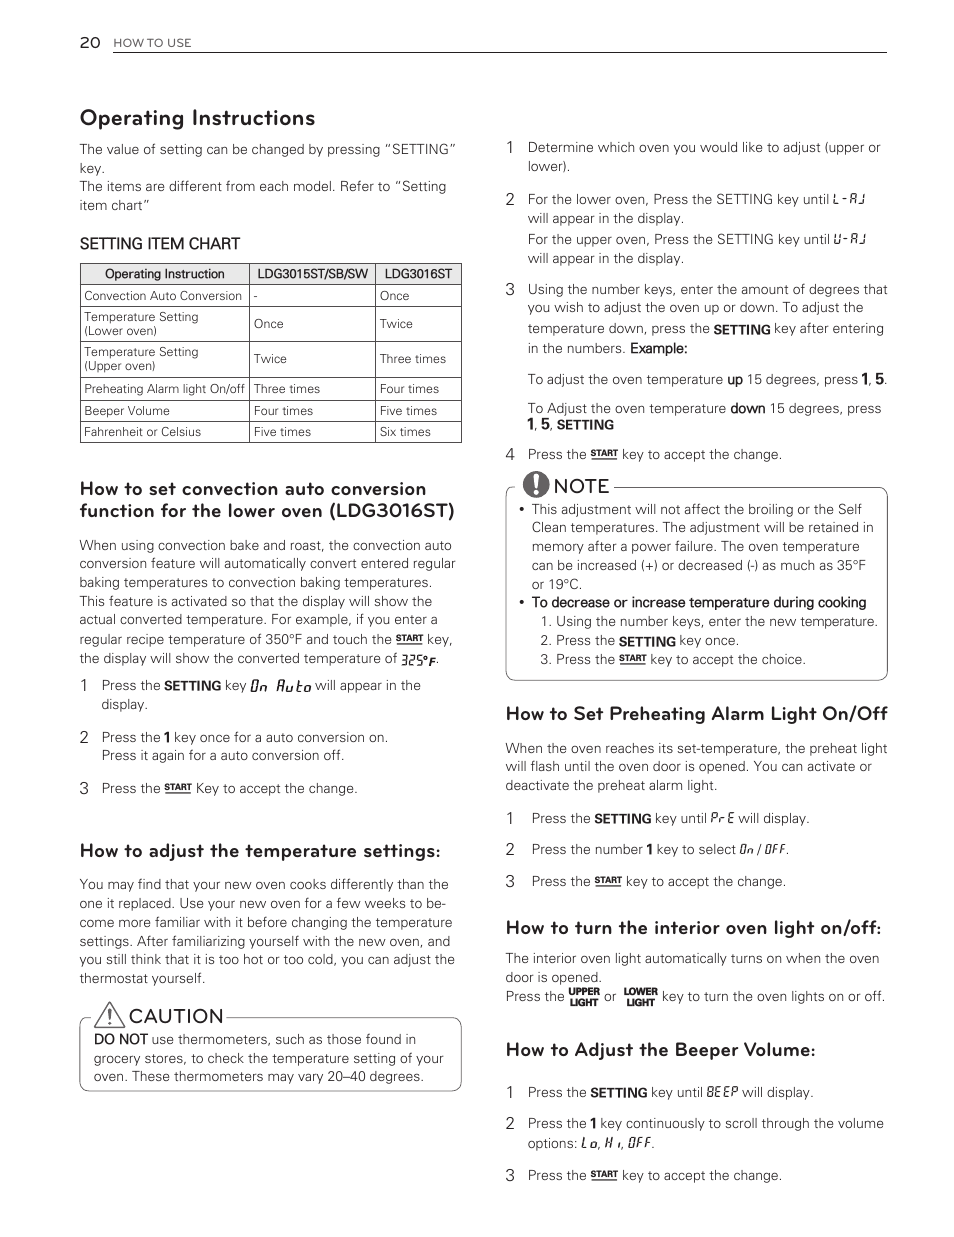 Operating instructions, Caution, How to set preheating alarm light on/off | How to turn the interior oven light on/off, How to adjust the beeper volume, How to adjust the temperature settings | LG LDG3016ST  EN User Manual | Page 20 / 47